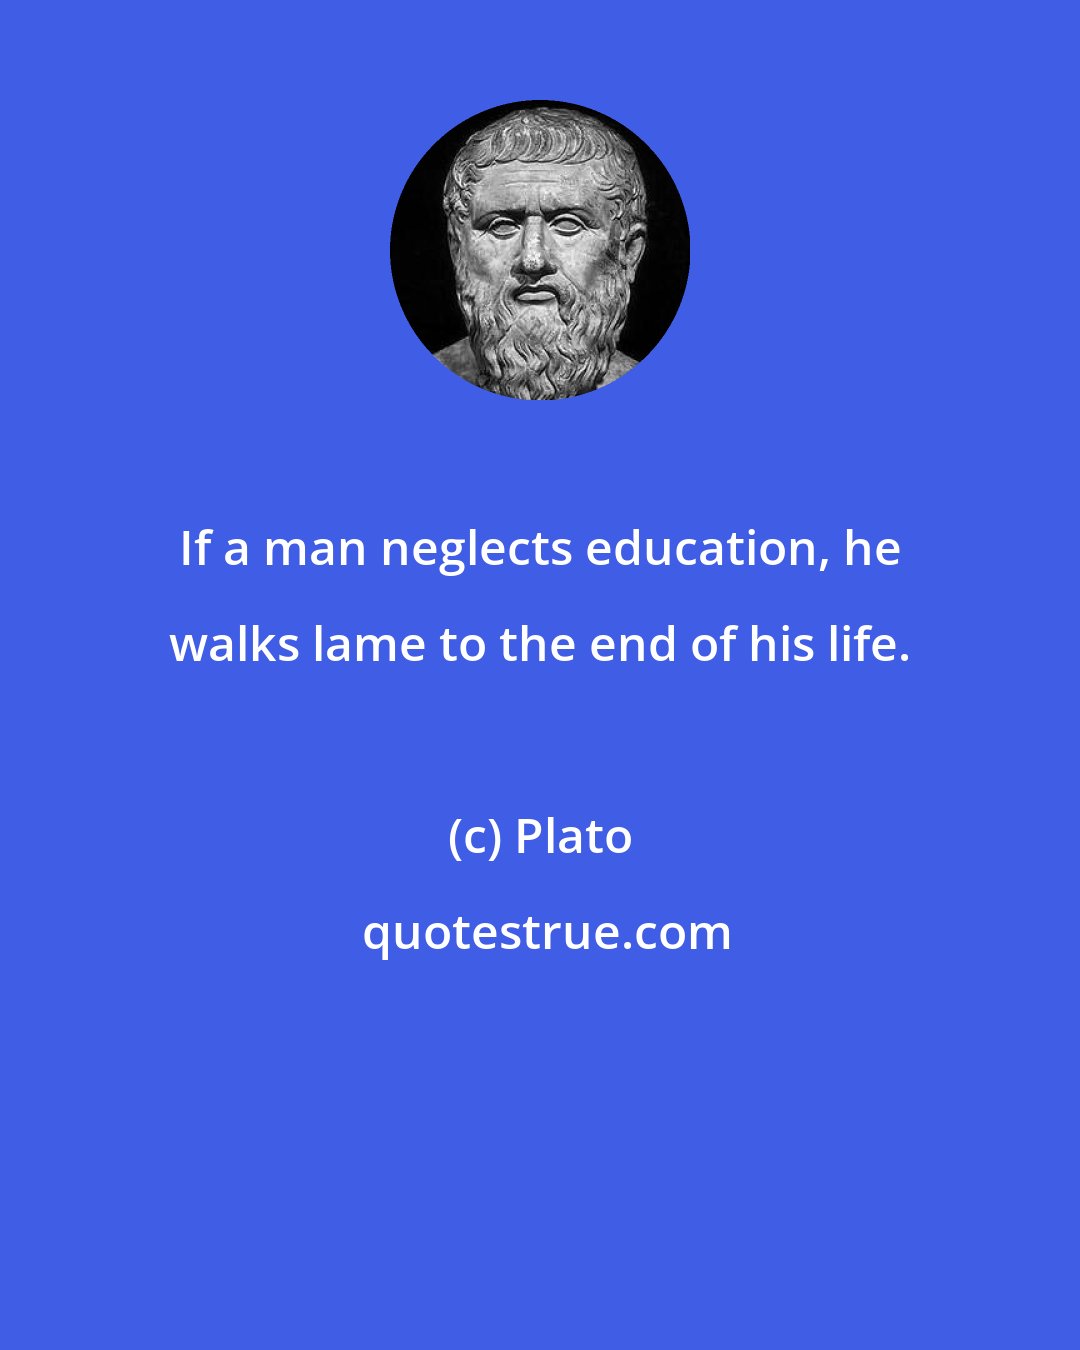 Plato: If a man neglects education, he walks lame to the end of his life.